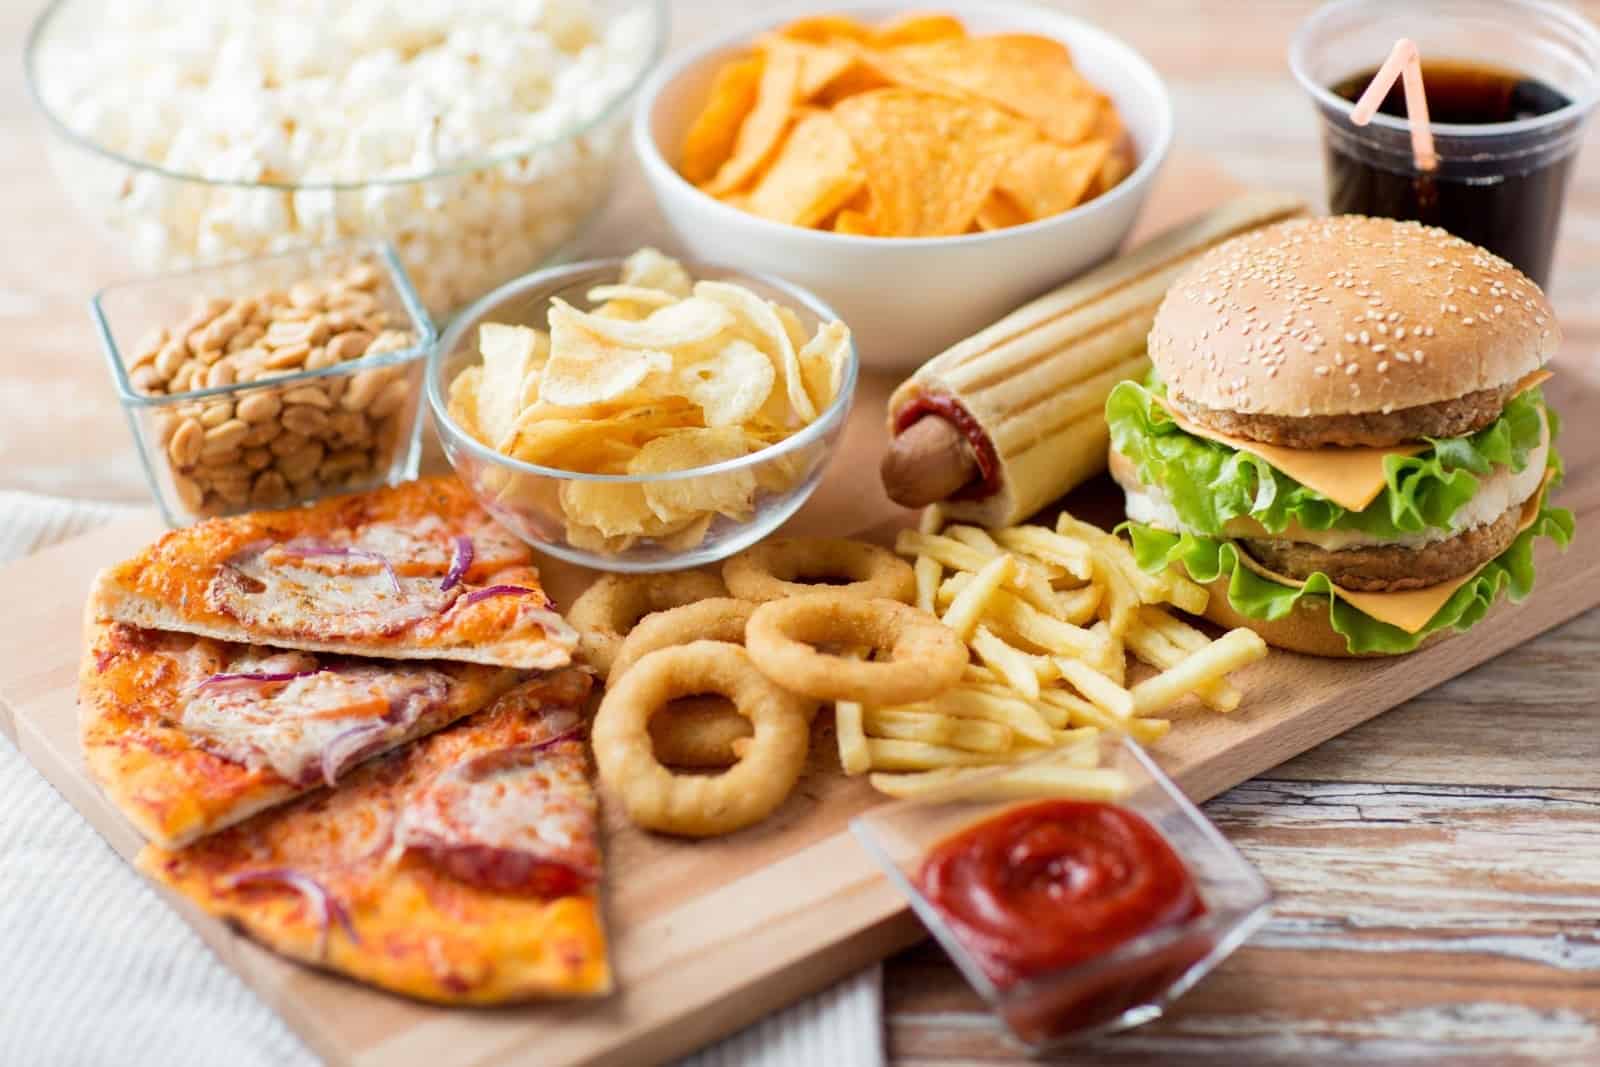 IBS foods to avoid: Variety of snacks on a wooden table